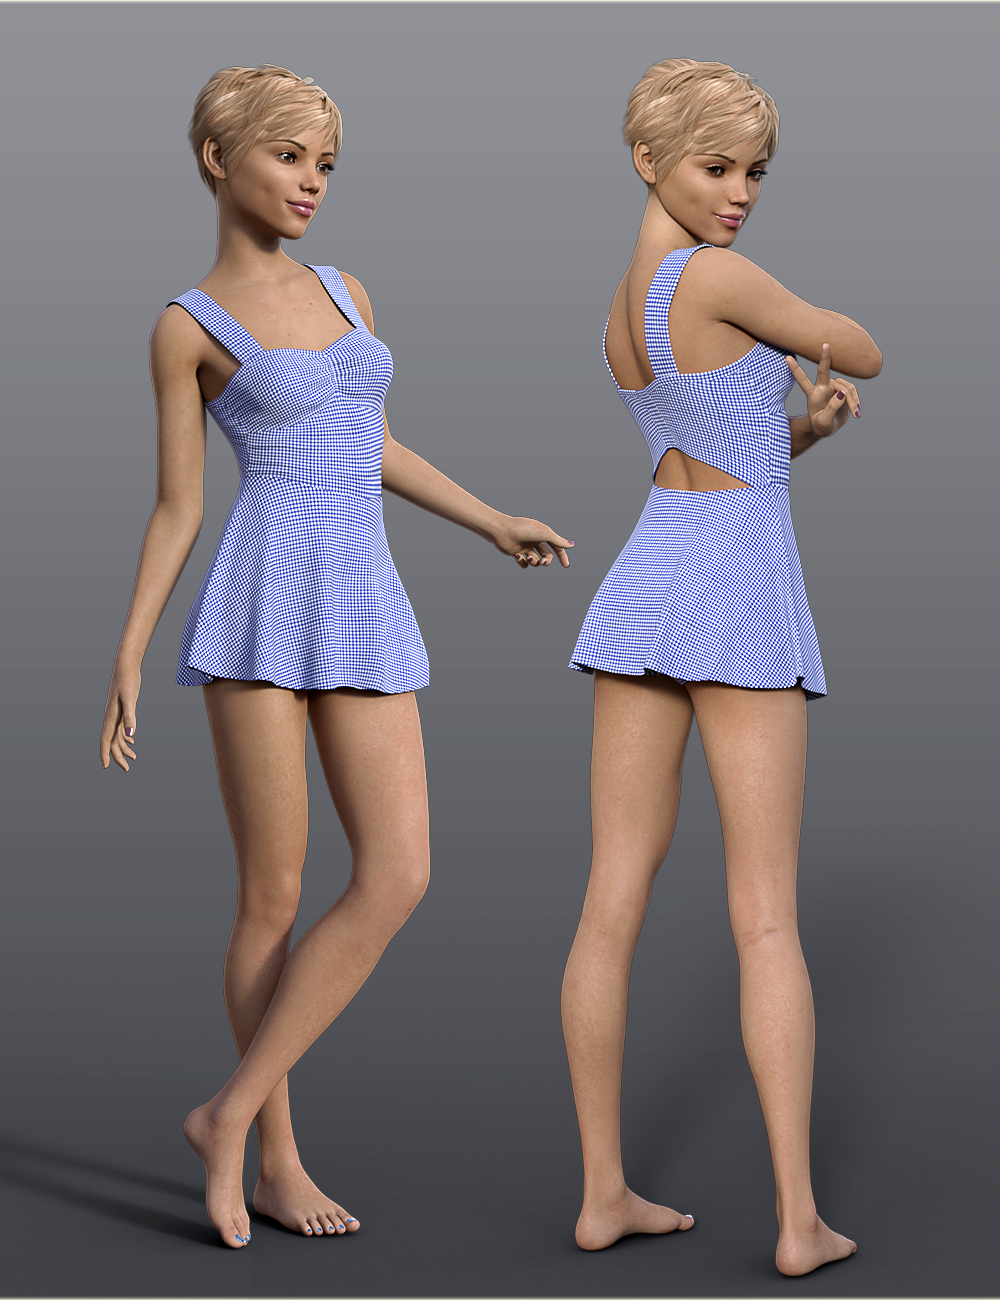 dForce H&C One Piece Swimsuit B for Genesis 8 Female(s) by: IH Kang, 3D Models by Daz 3D